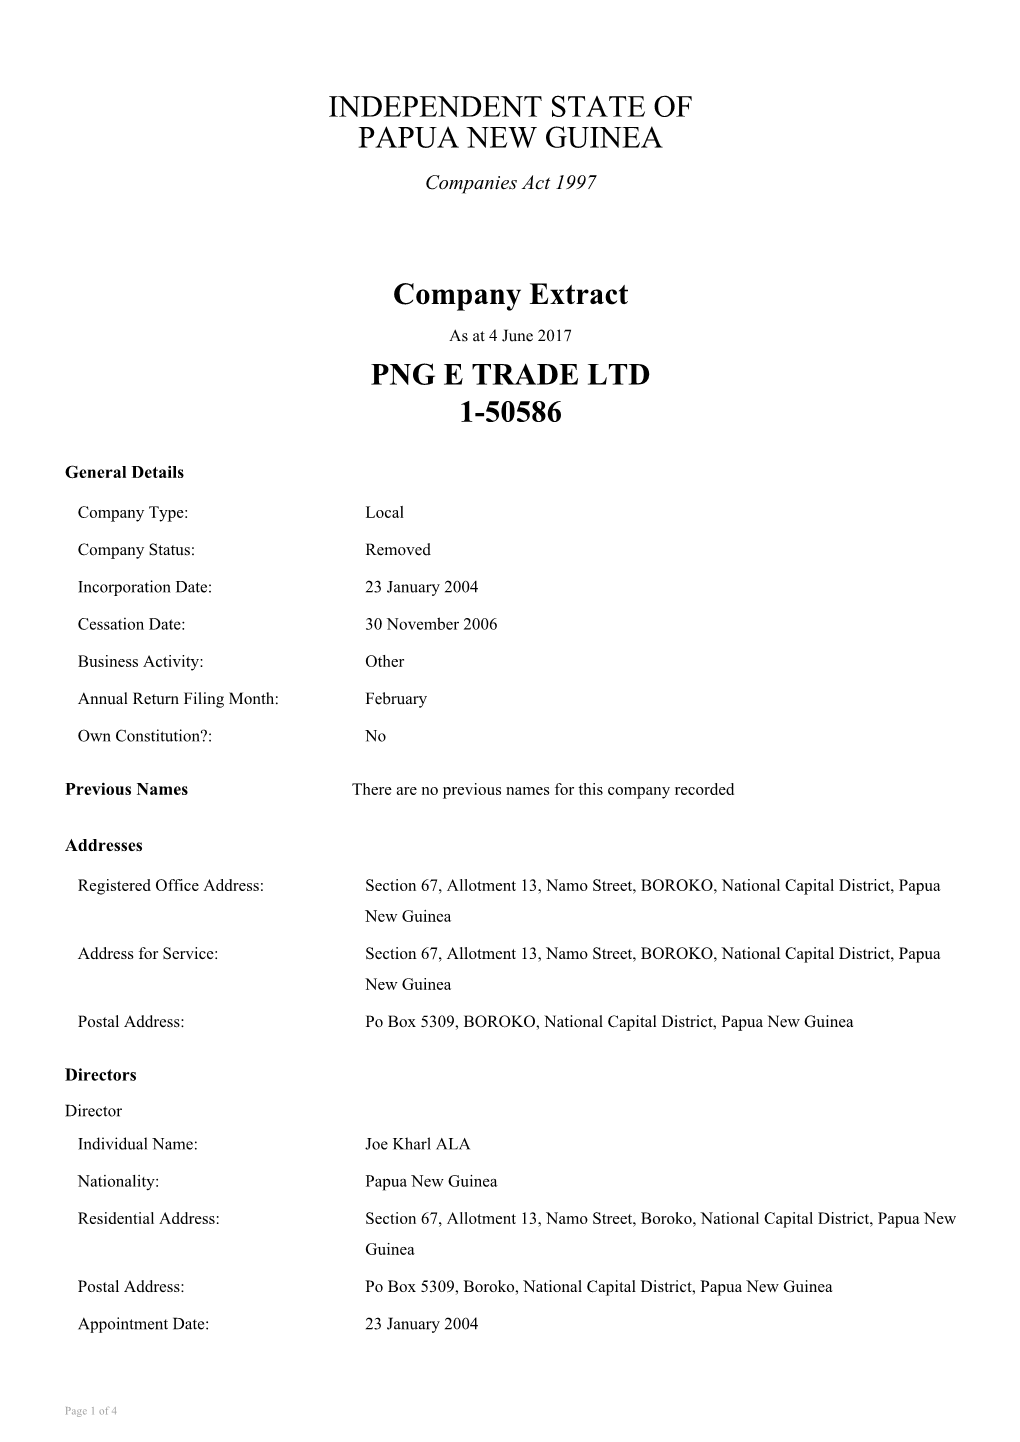 INDEPENDENT STATE of PAPUA NEW GUINEA Company Extract